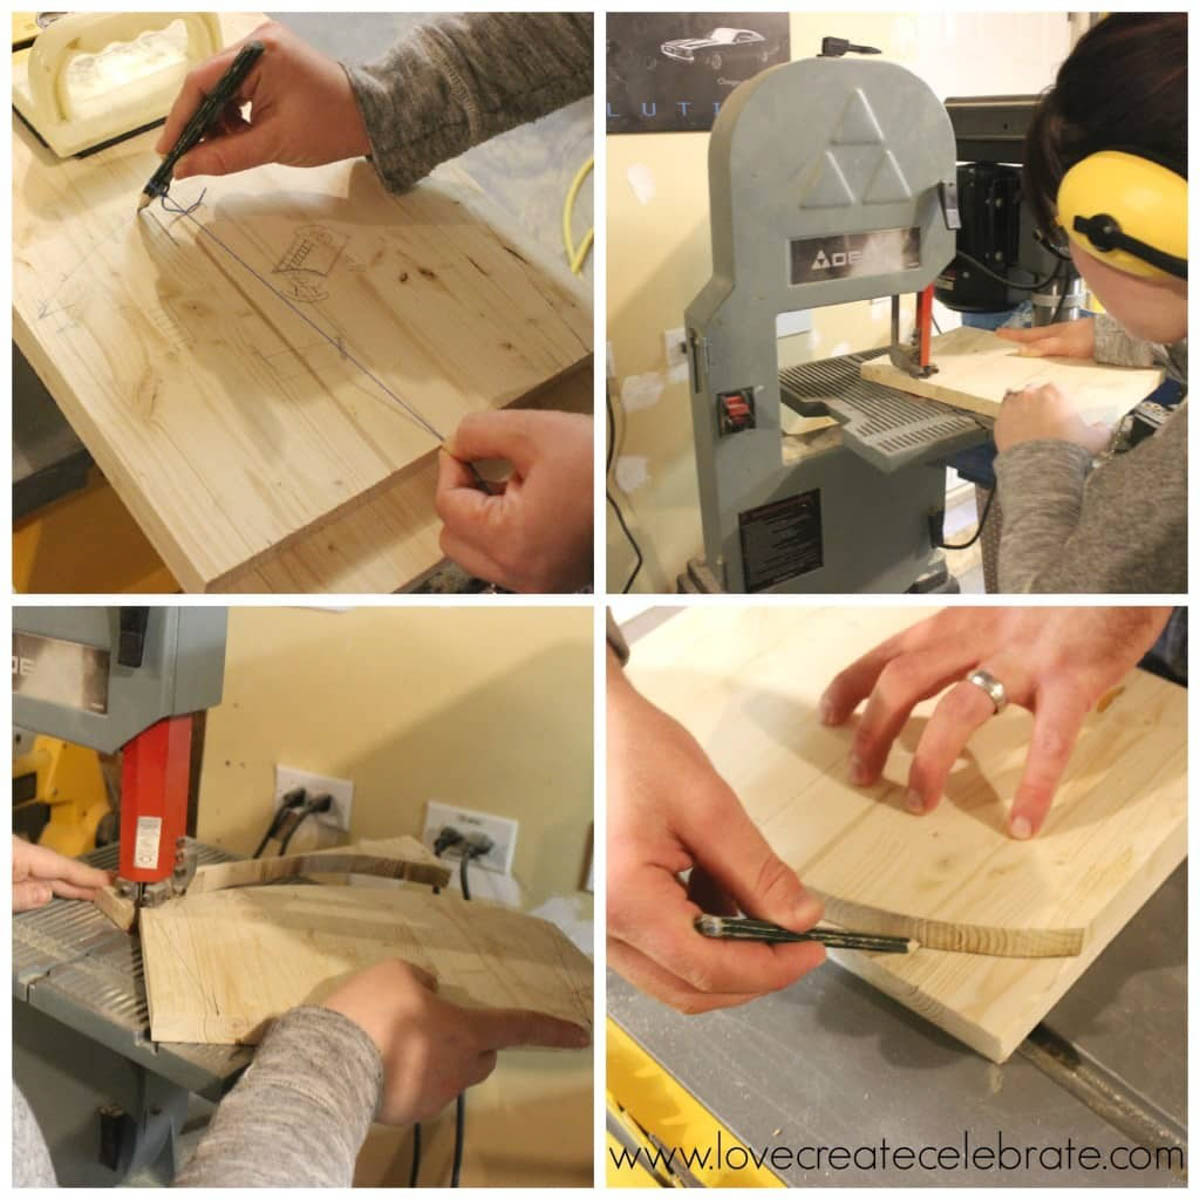 Image collage of woodworking the DIY baby doll's crib